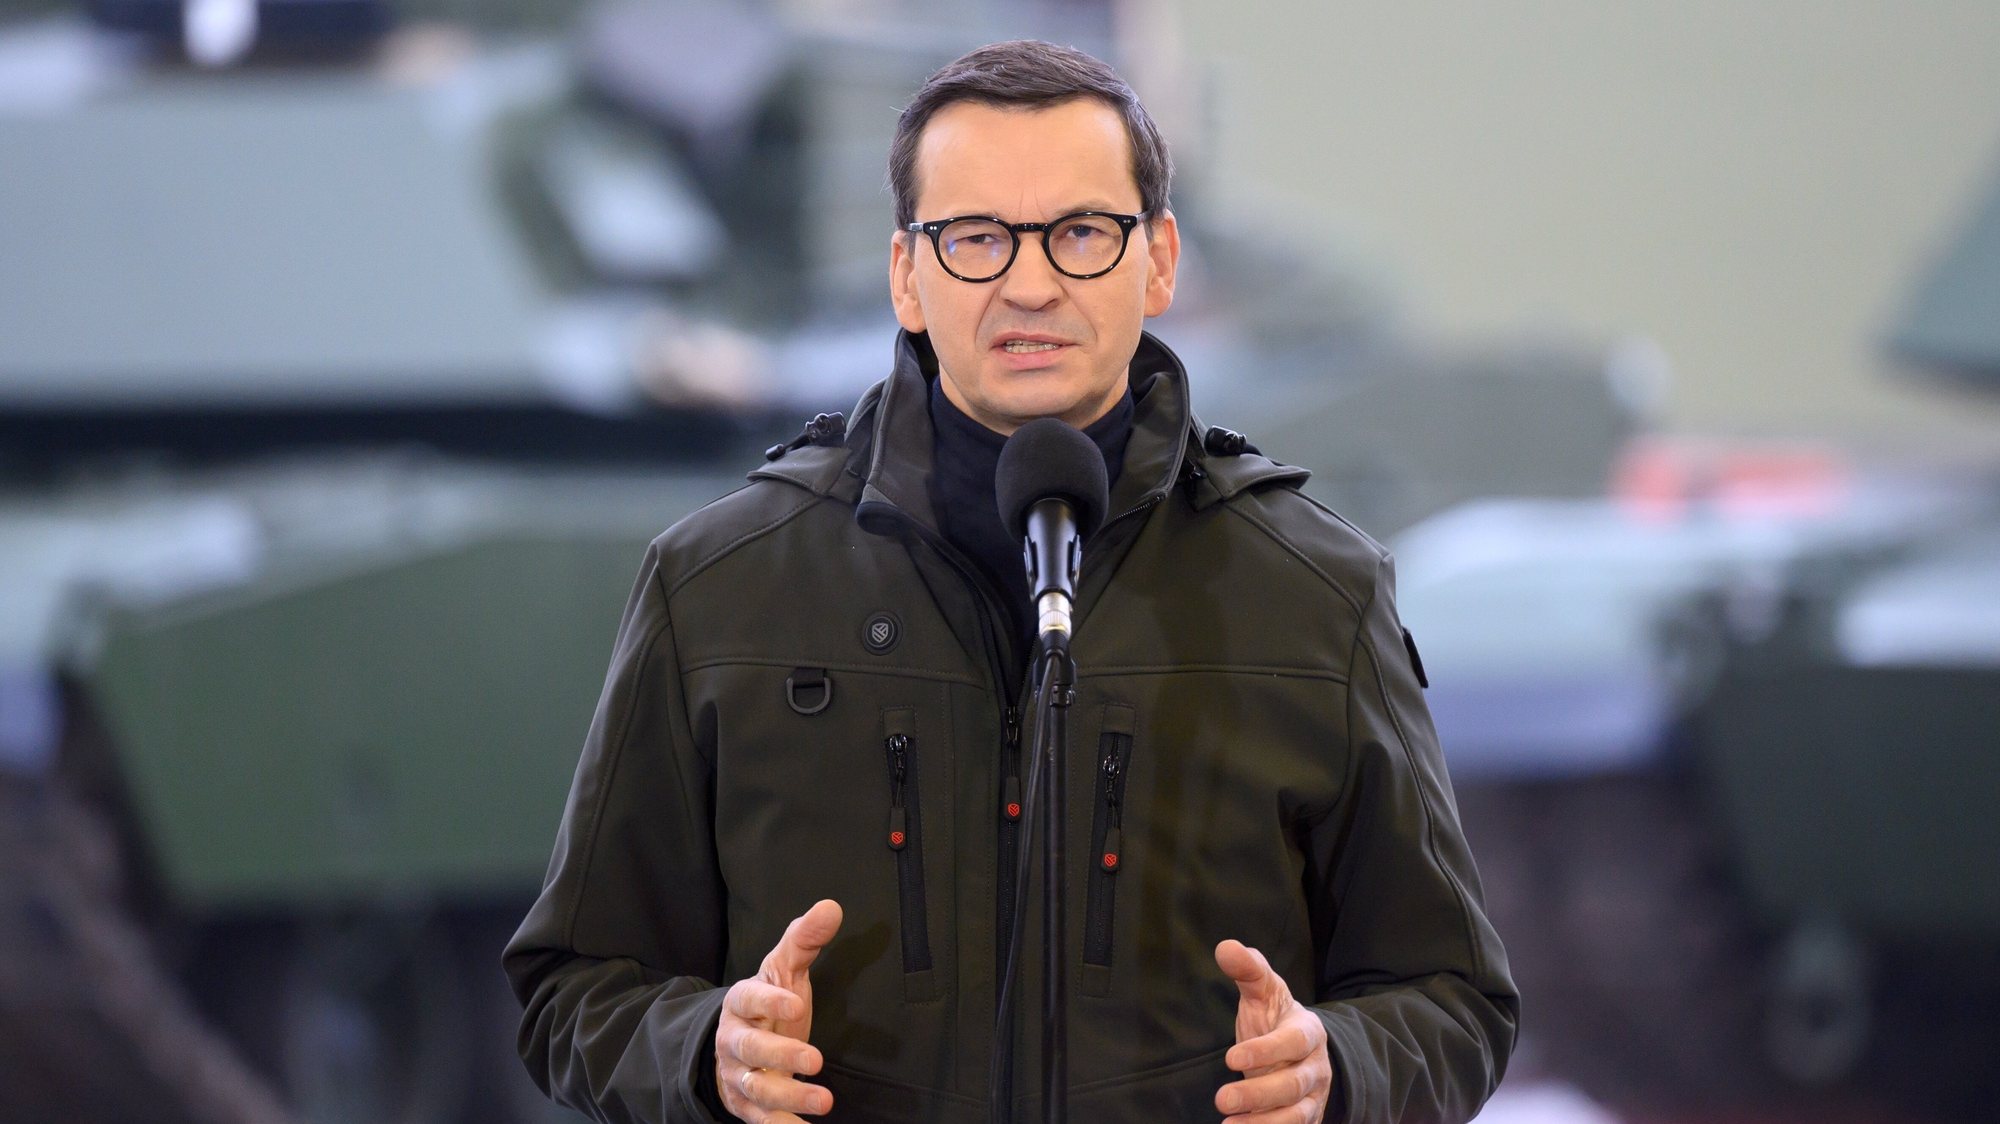 epa10377020 Polish Prime Minister Mateusz Morawiecki speaks during a meeting with soldiers, including crews training on Abrams tanks, at the Land Forces Training Center in Biedrusko, Poland 23 December 2022. According to the US Defense Security Cooperation Agency, the State Department approved a possible sale of M1A1 Abrams Main Battle Tanks and related equipment to Poland for an estimated cost of 3.75 billion dollars on 6 December 2022.  EPA/Jakub Kaczmarczyk POLAND OUT